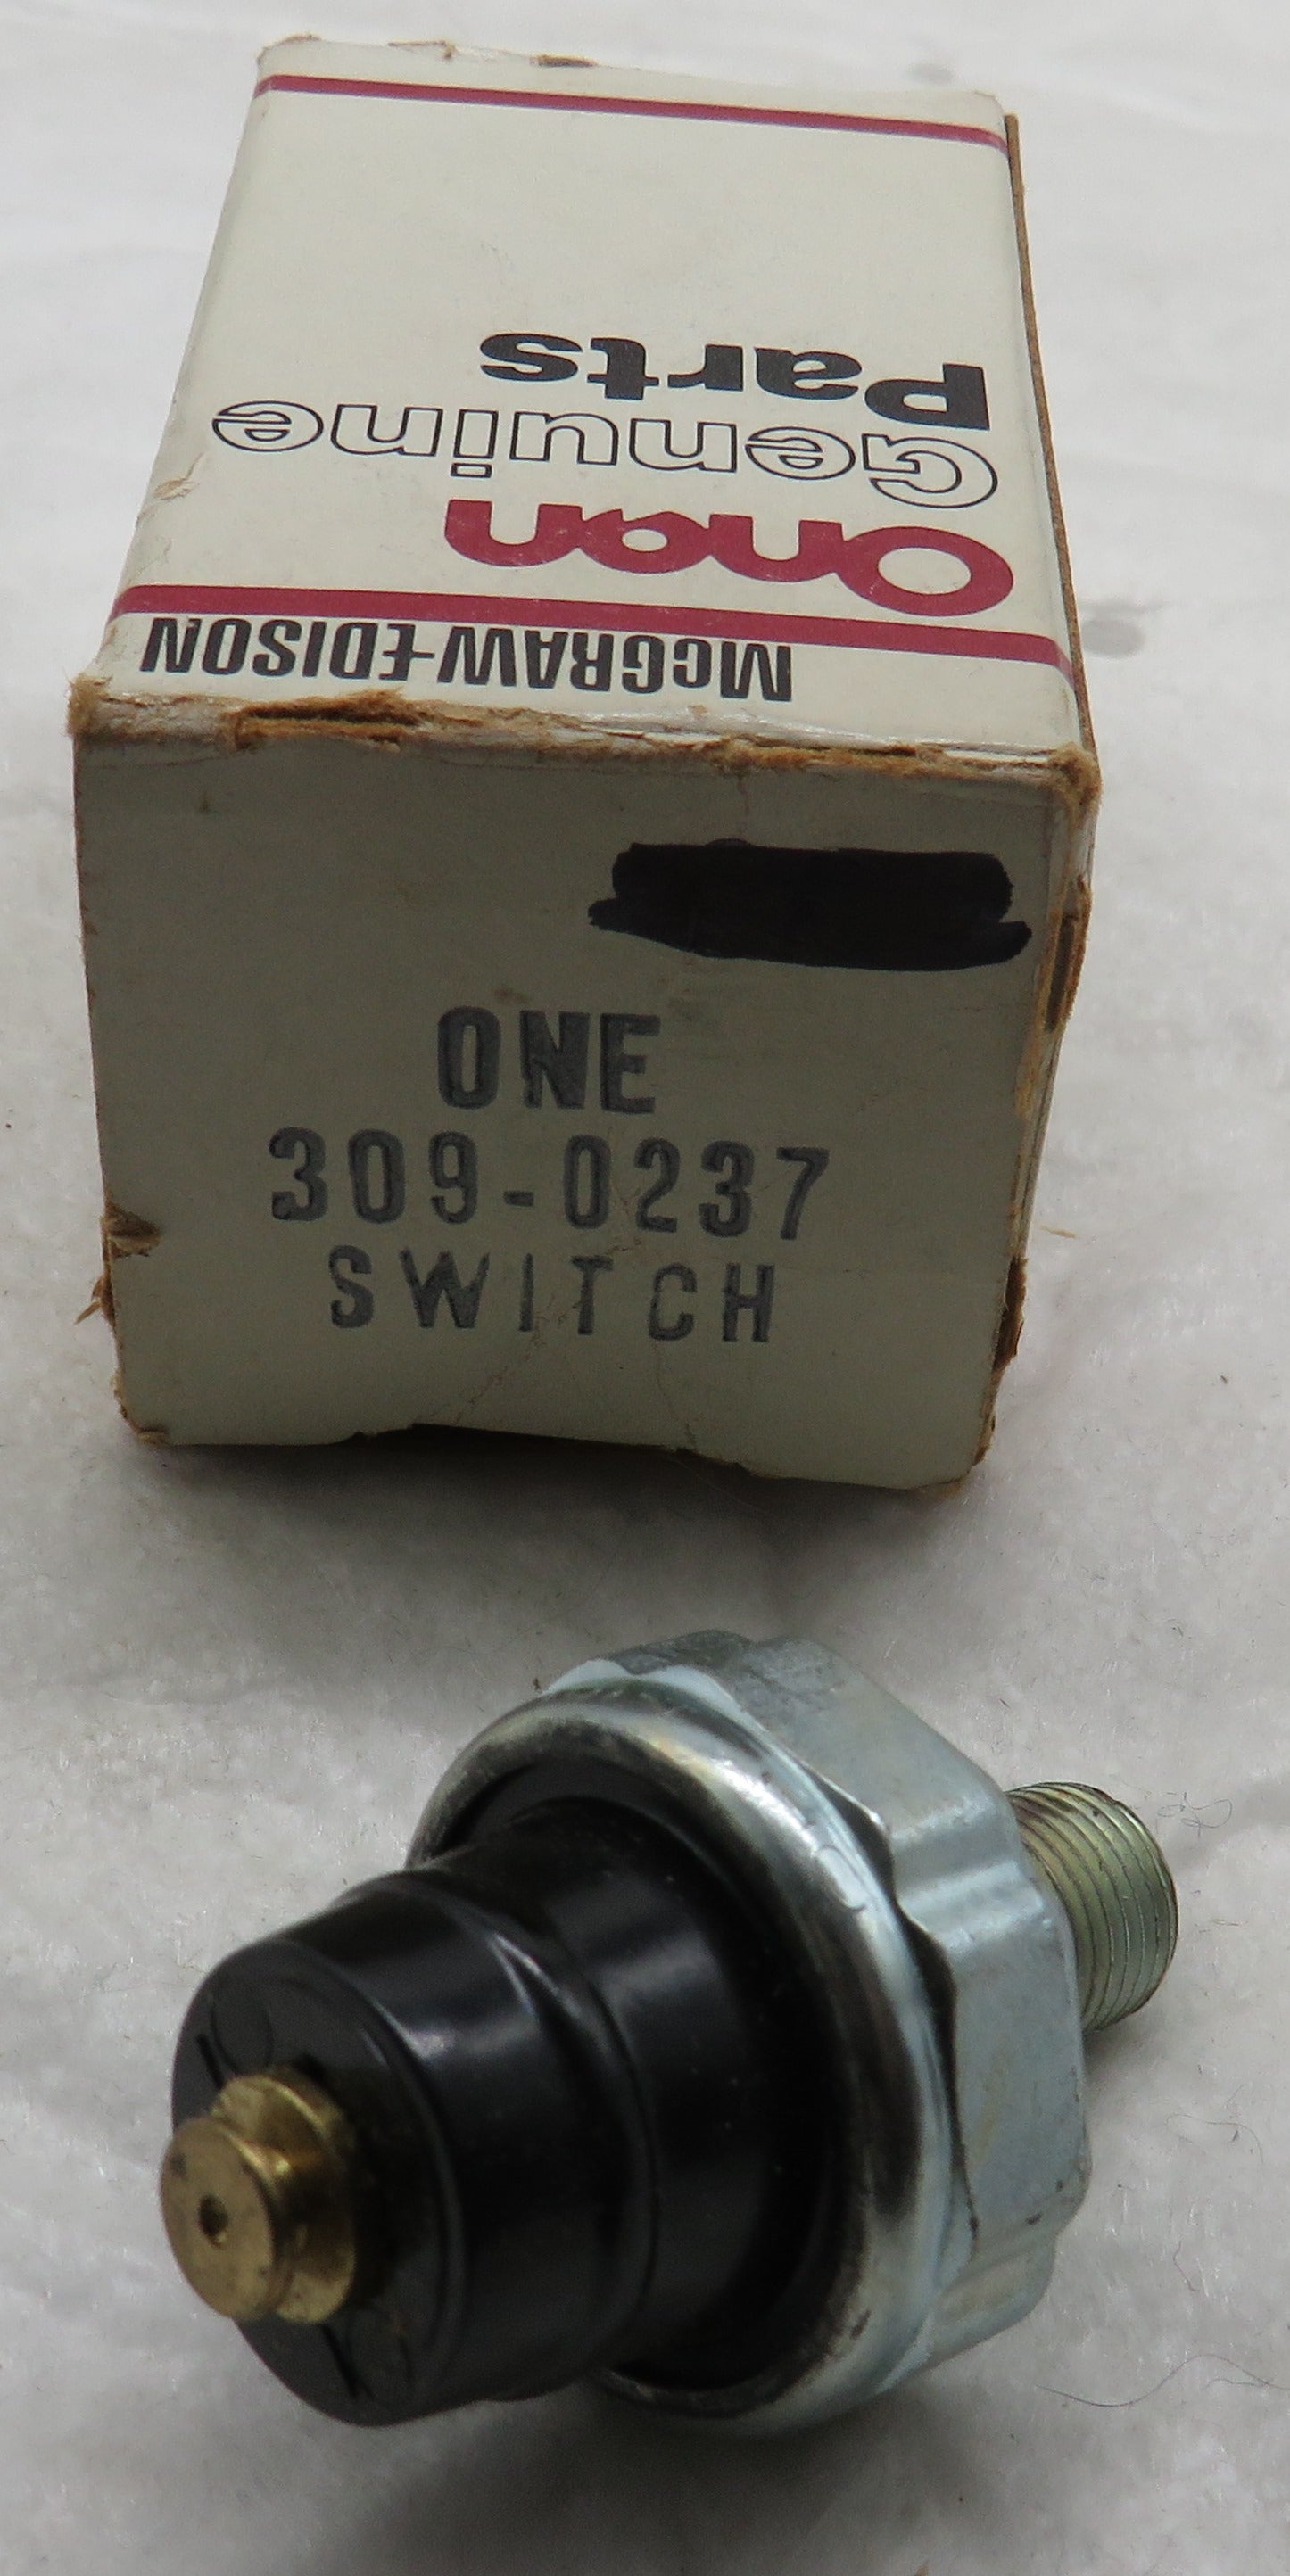 Onan 309-0237 Low Oil Pressure Switch @ 8-10 Psi @ lowering pressure OBSOLETE for B43M-GA016 Industrial Engines Spec A-C 